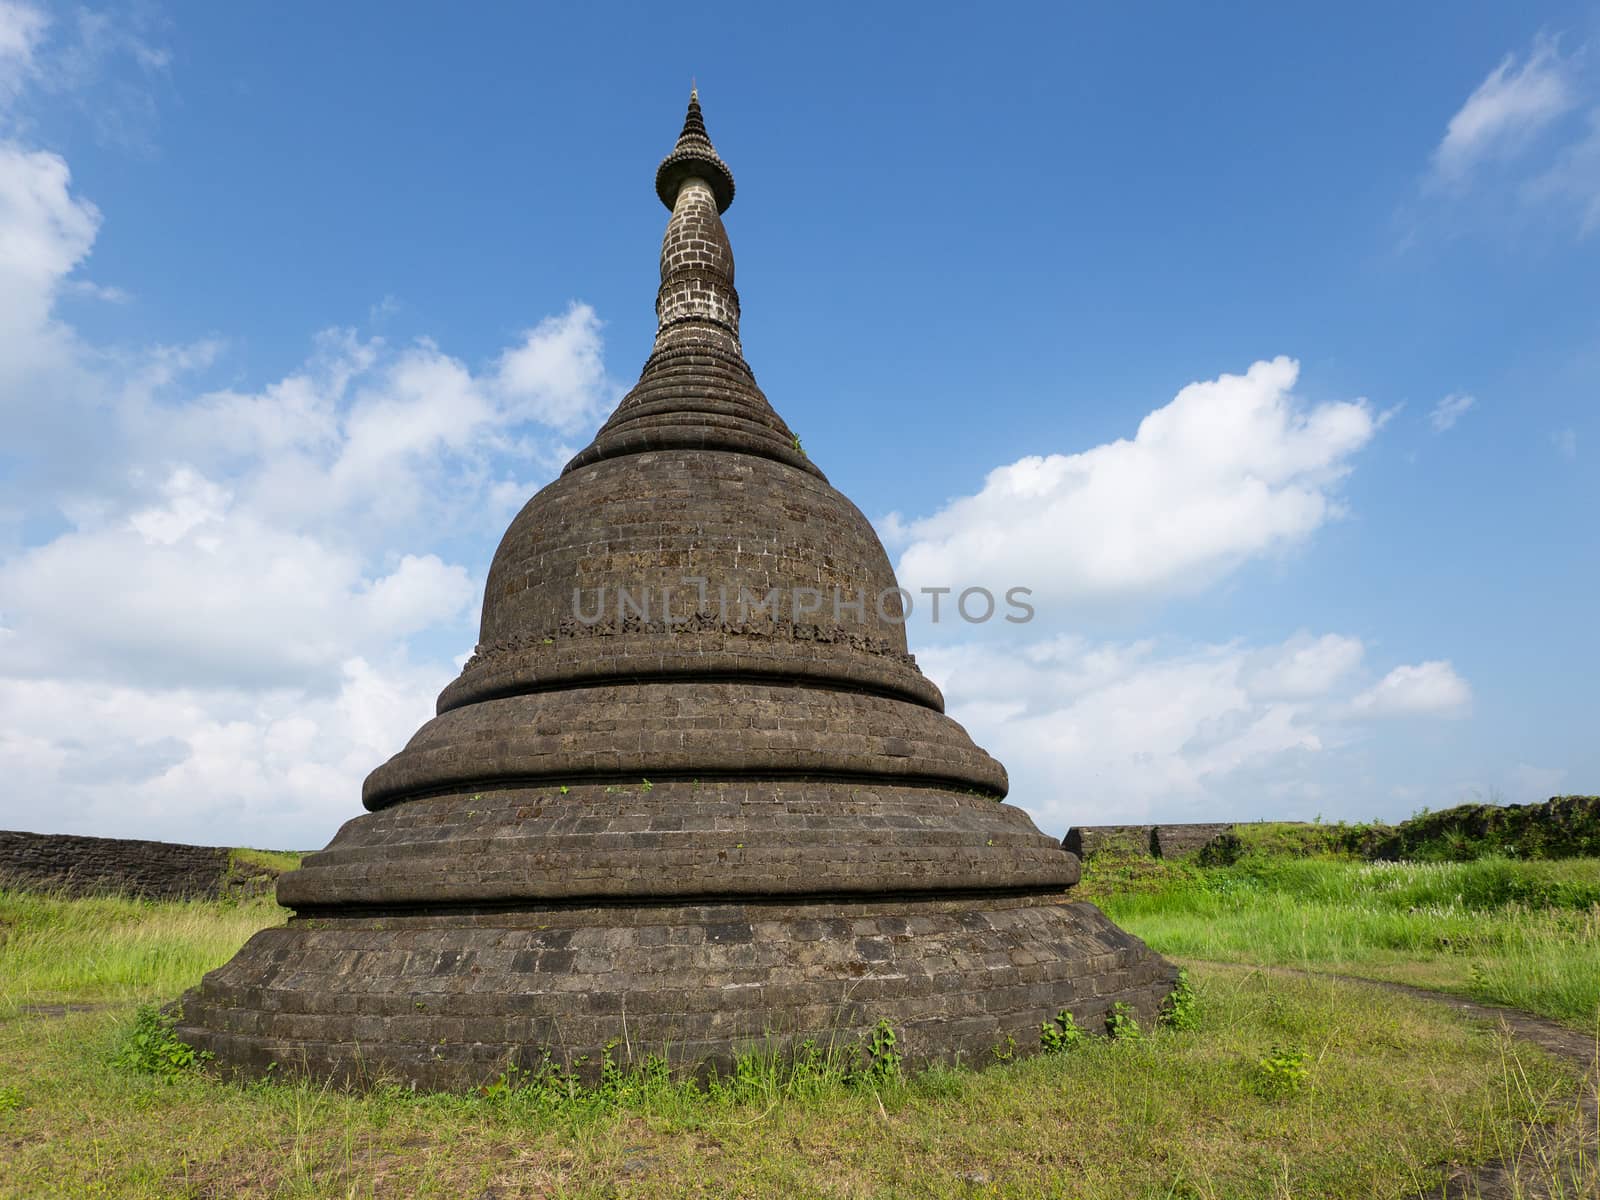 The main stupa of the Koe-thaung Temple, the temple of the 90,000 Buddhas, built by King Min Dikkha during the years 1554-1556 in Mrauk U, Rakhine State in Myanmar.